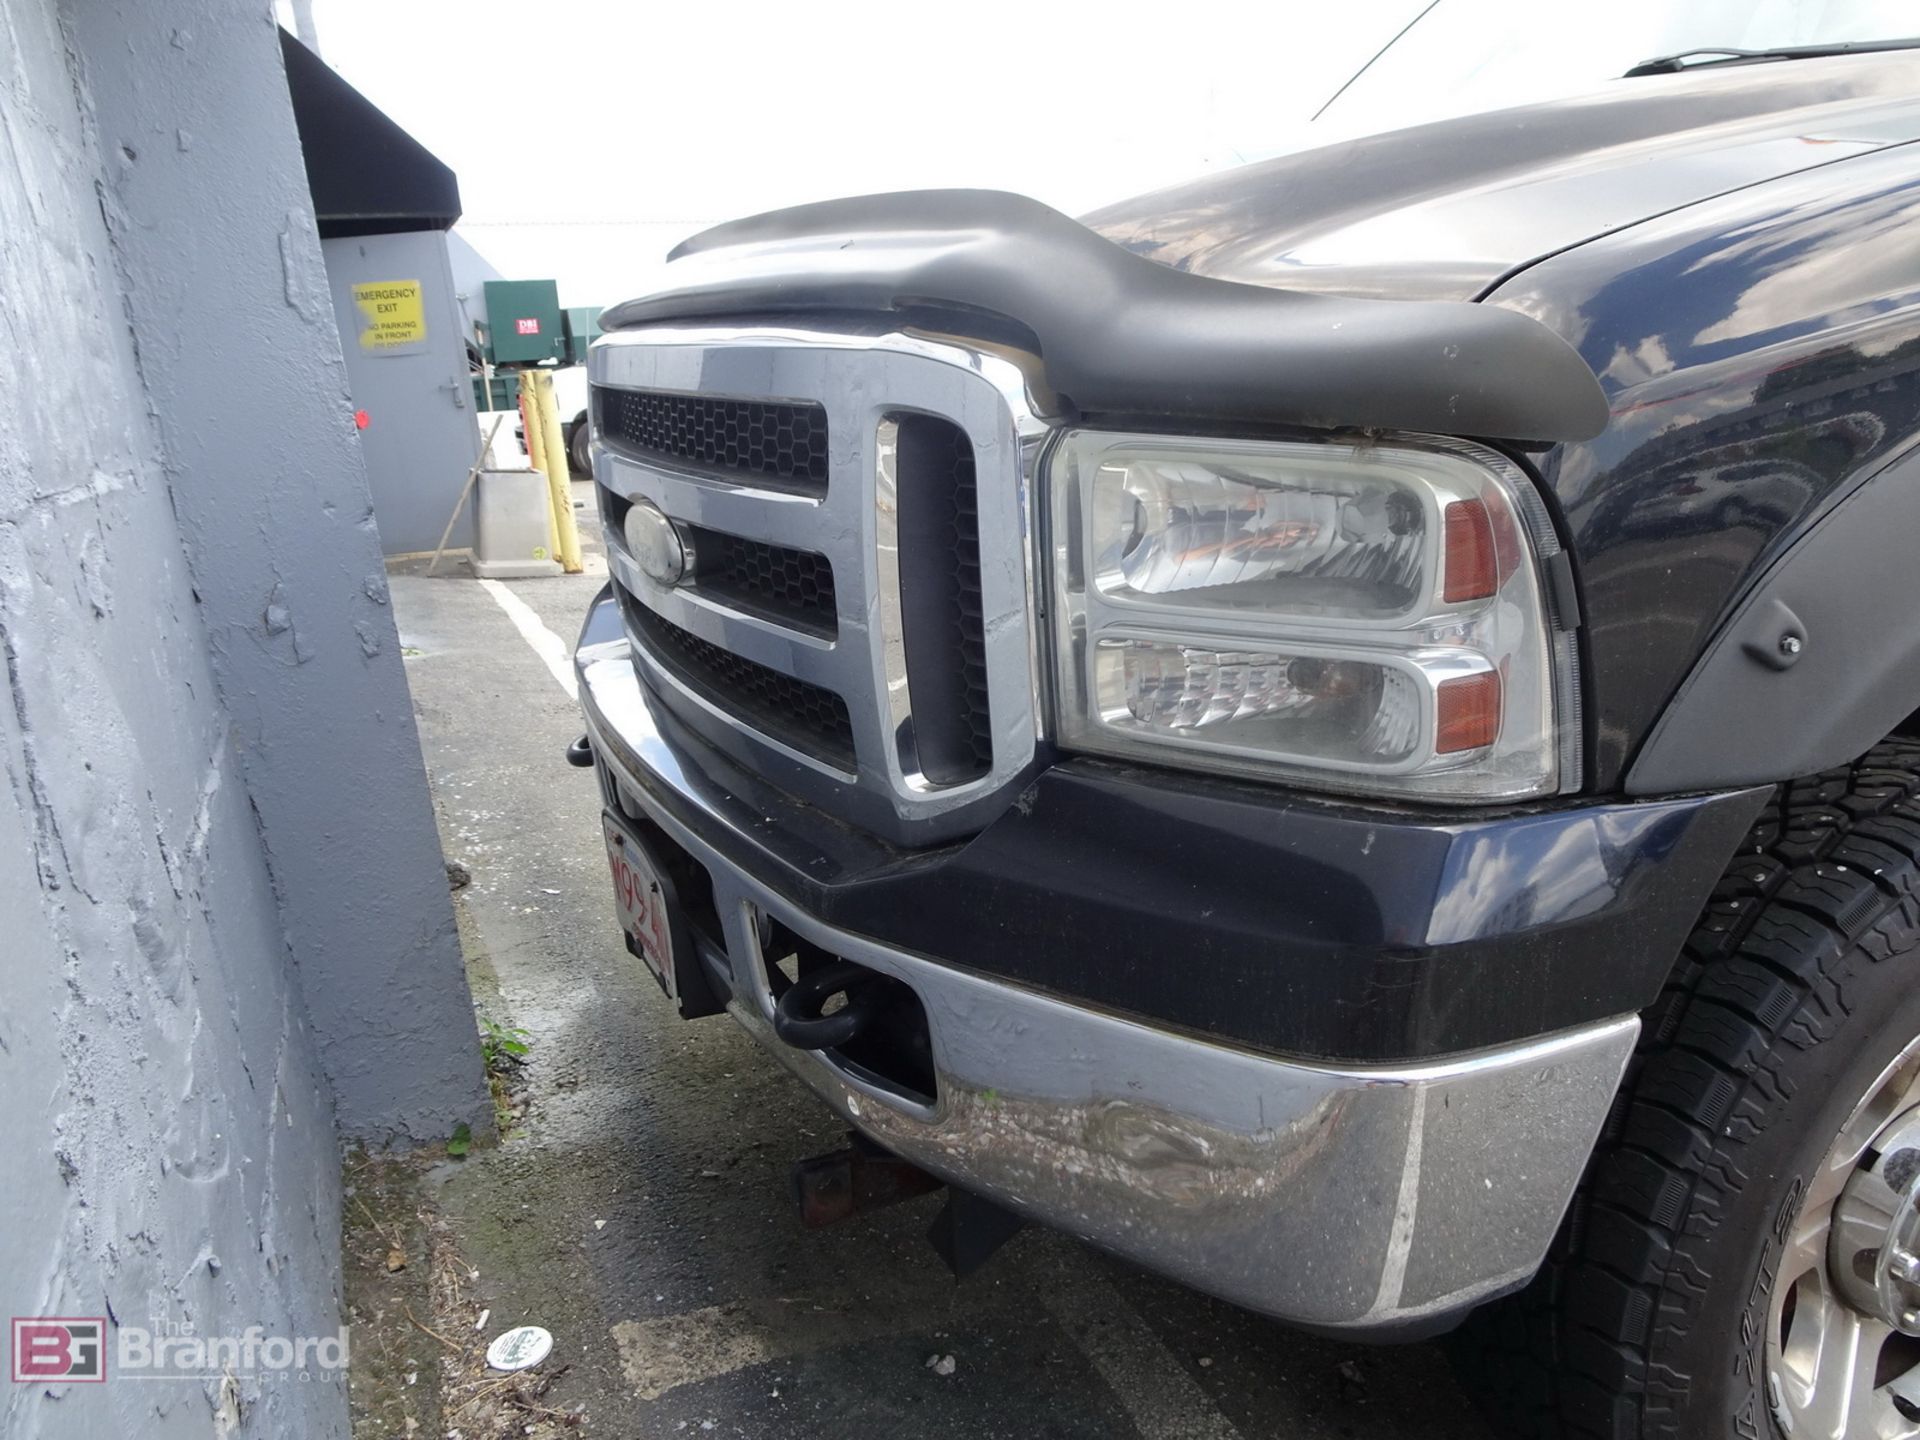 2005 Ford F-350 Pickup Truck - Image 6 of 6